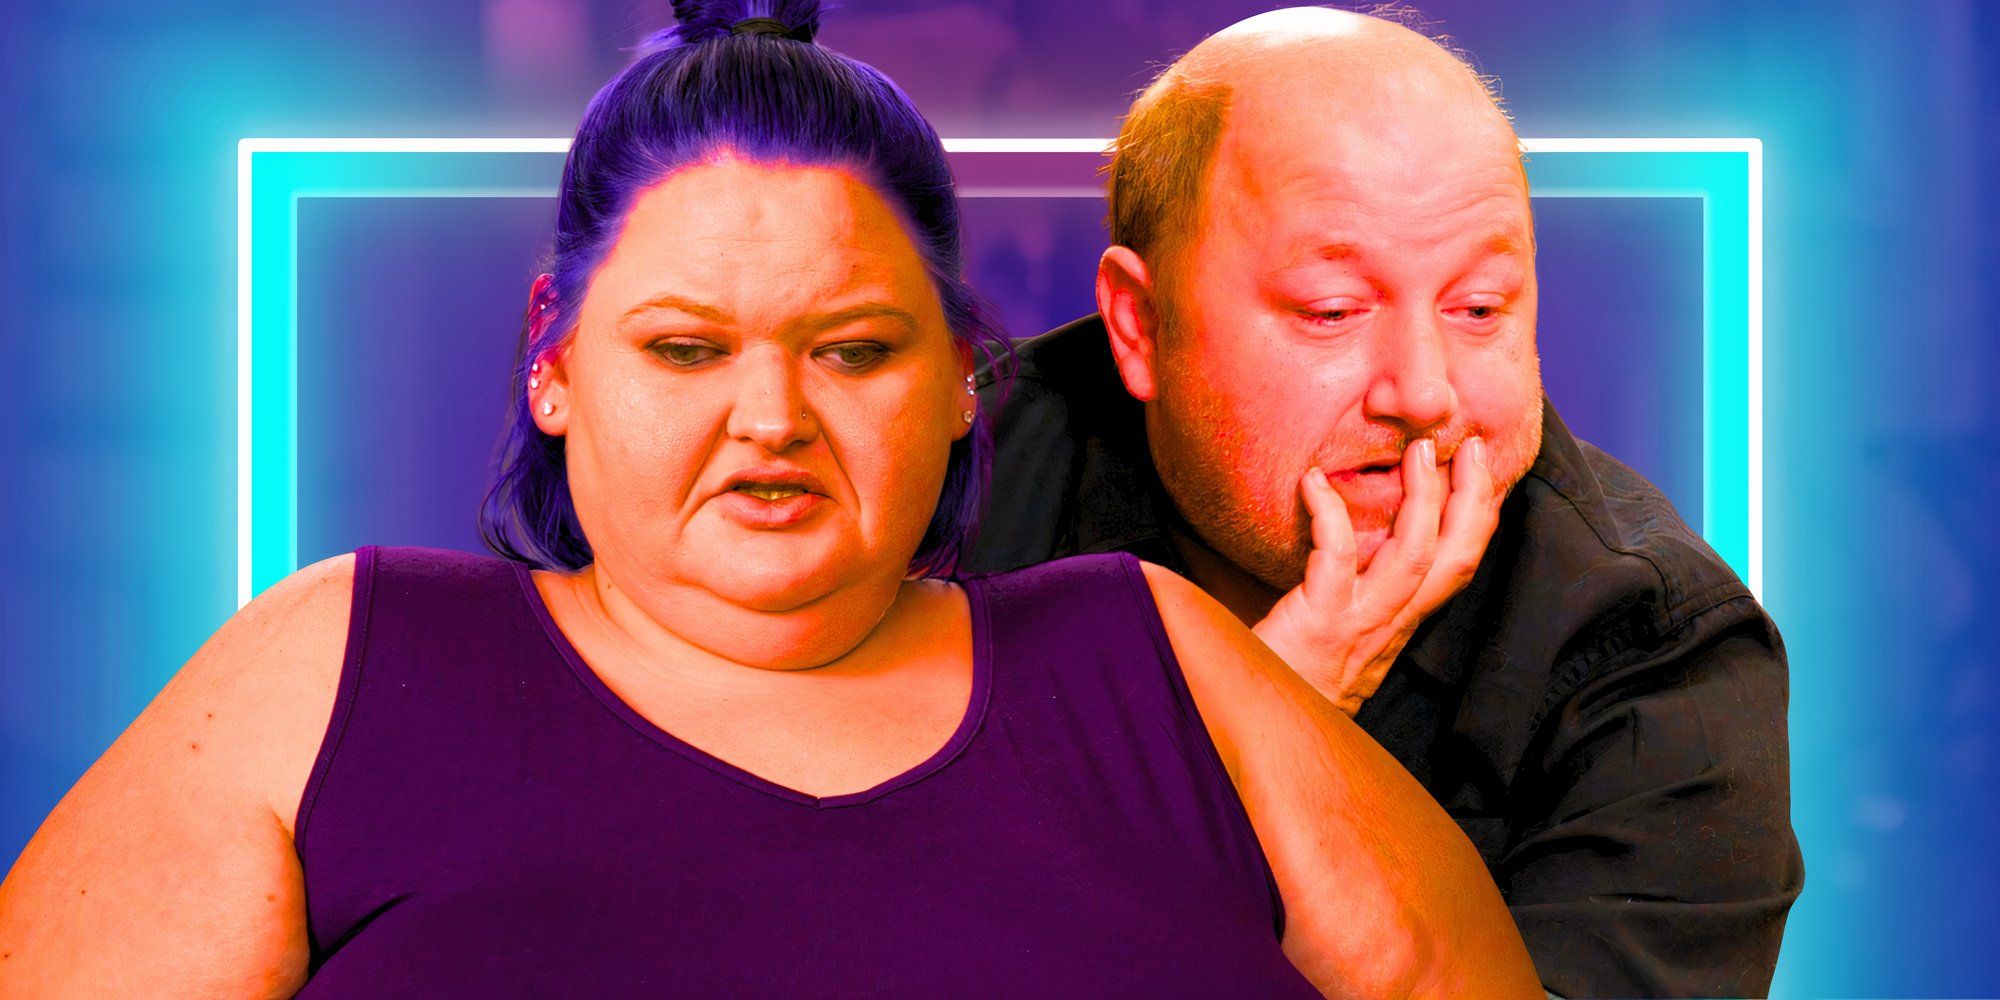 montage of Amy Slaton & Michael Halterman from 1000-lb sisters looking sad with blue background